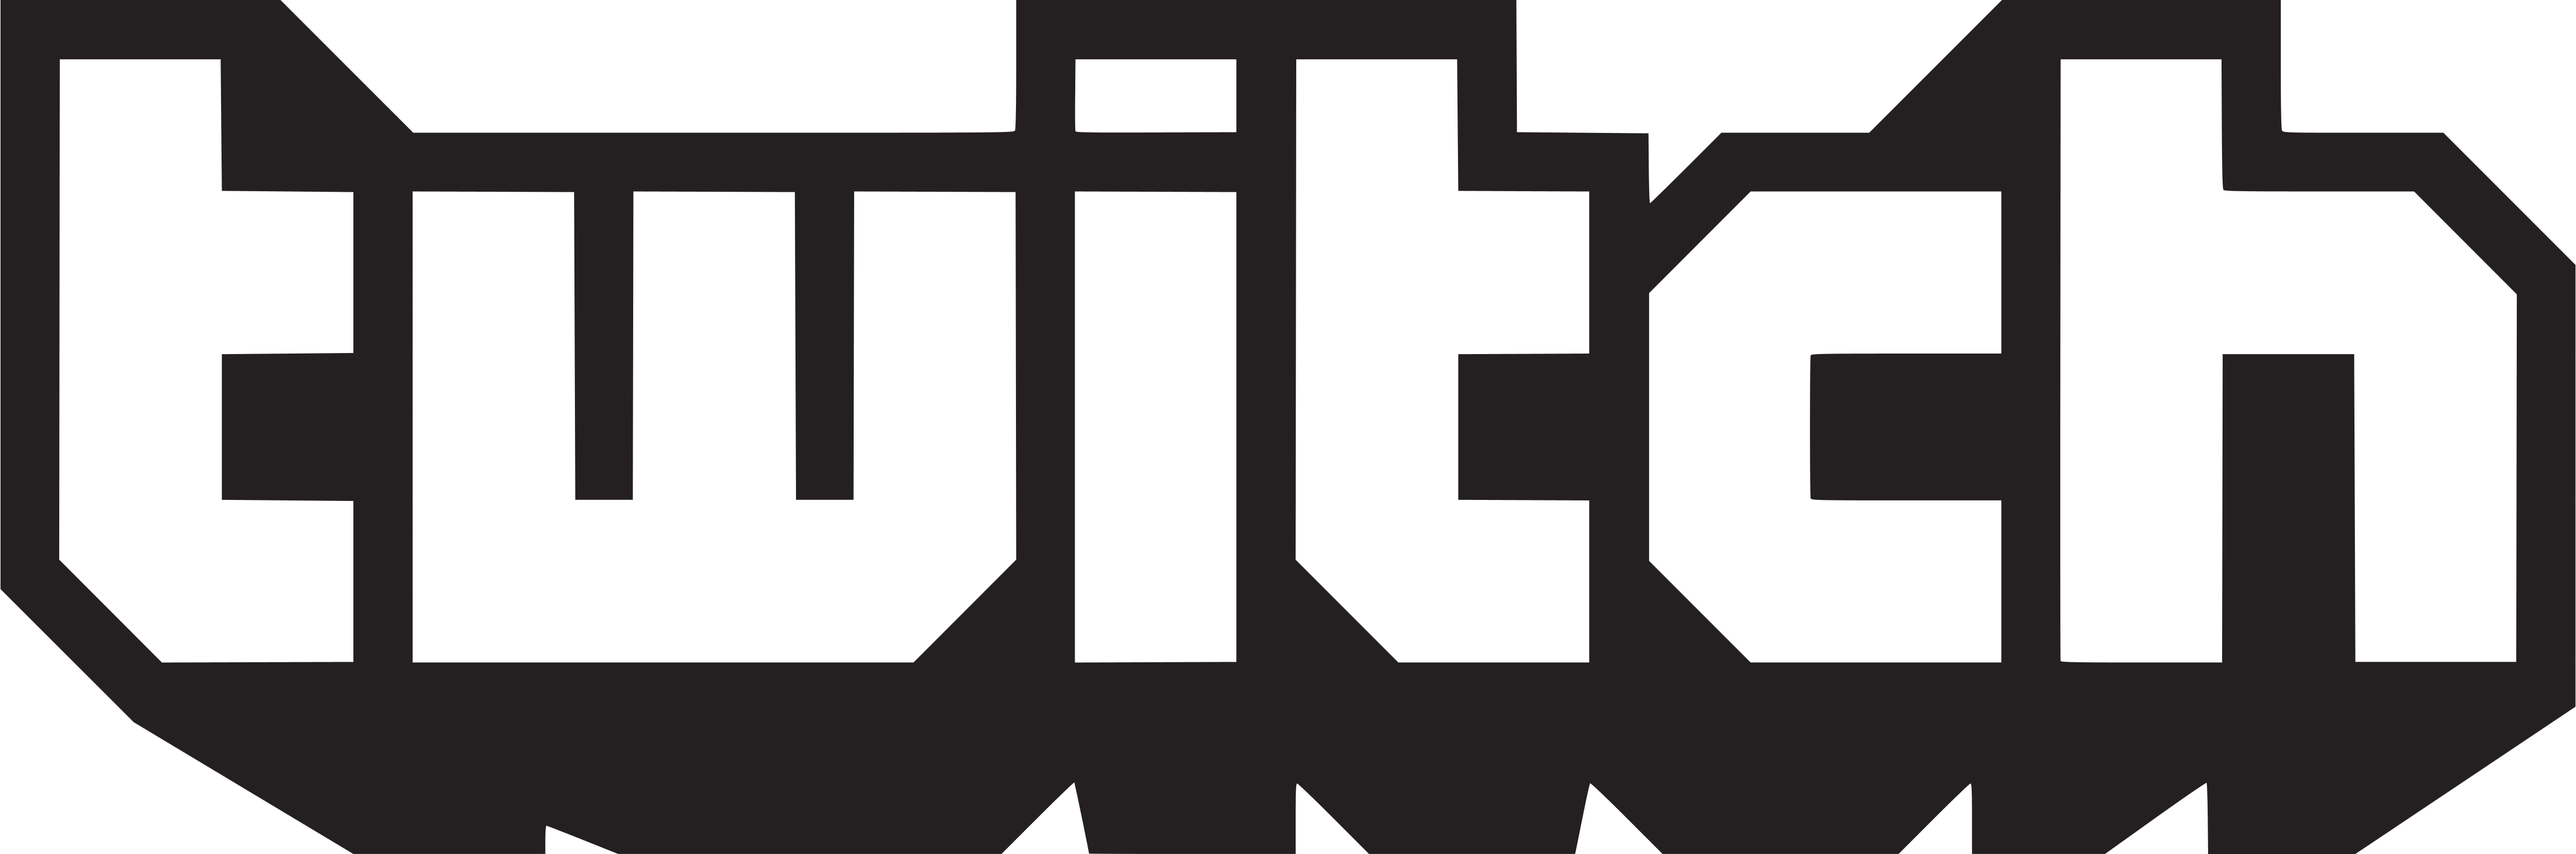 Twitch – Logos Download